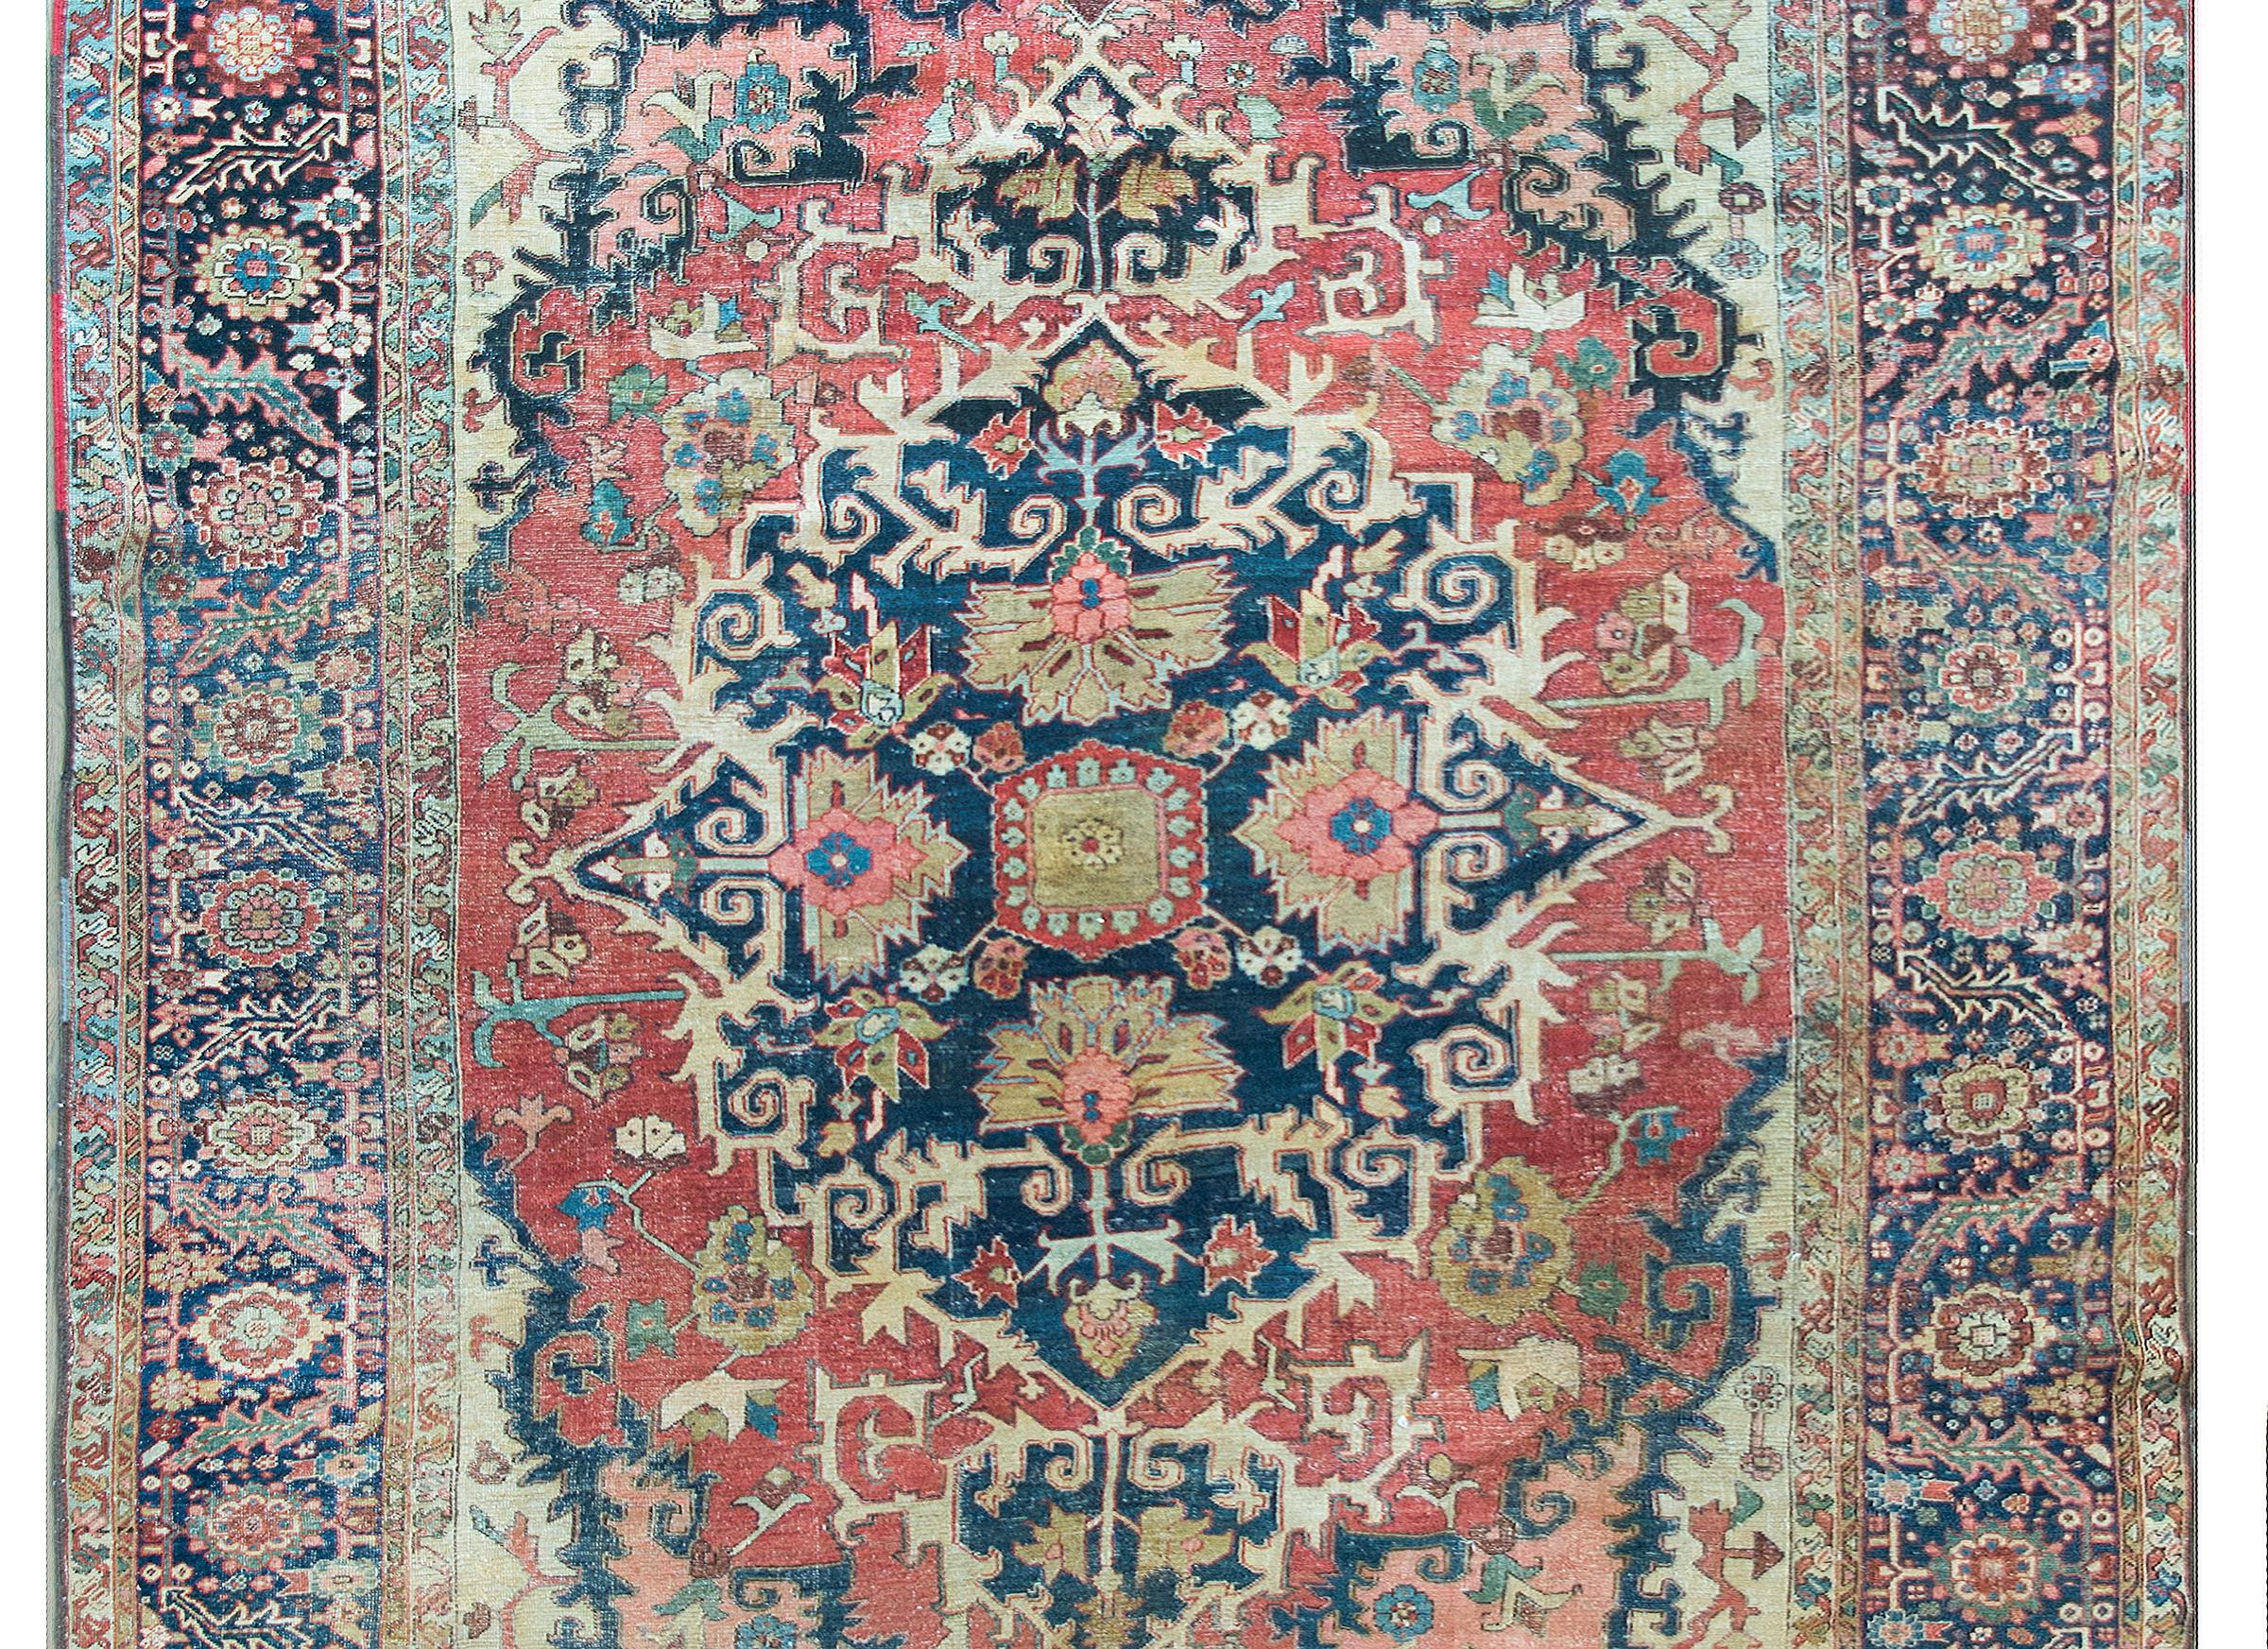 A remarkable and rare late 19th century Persian Heriz Serapi rug with the most wonderful pattern containing a large central medallion with stylized flowers and scrolling vines, woven in crimson, ochre, pink, light indigo, and set against a dark